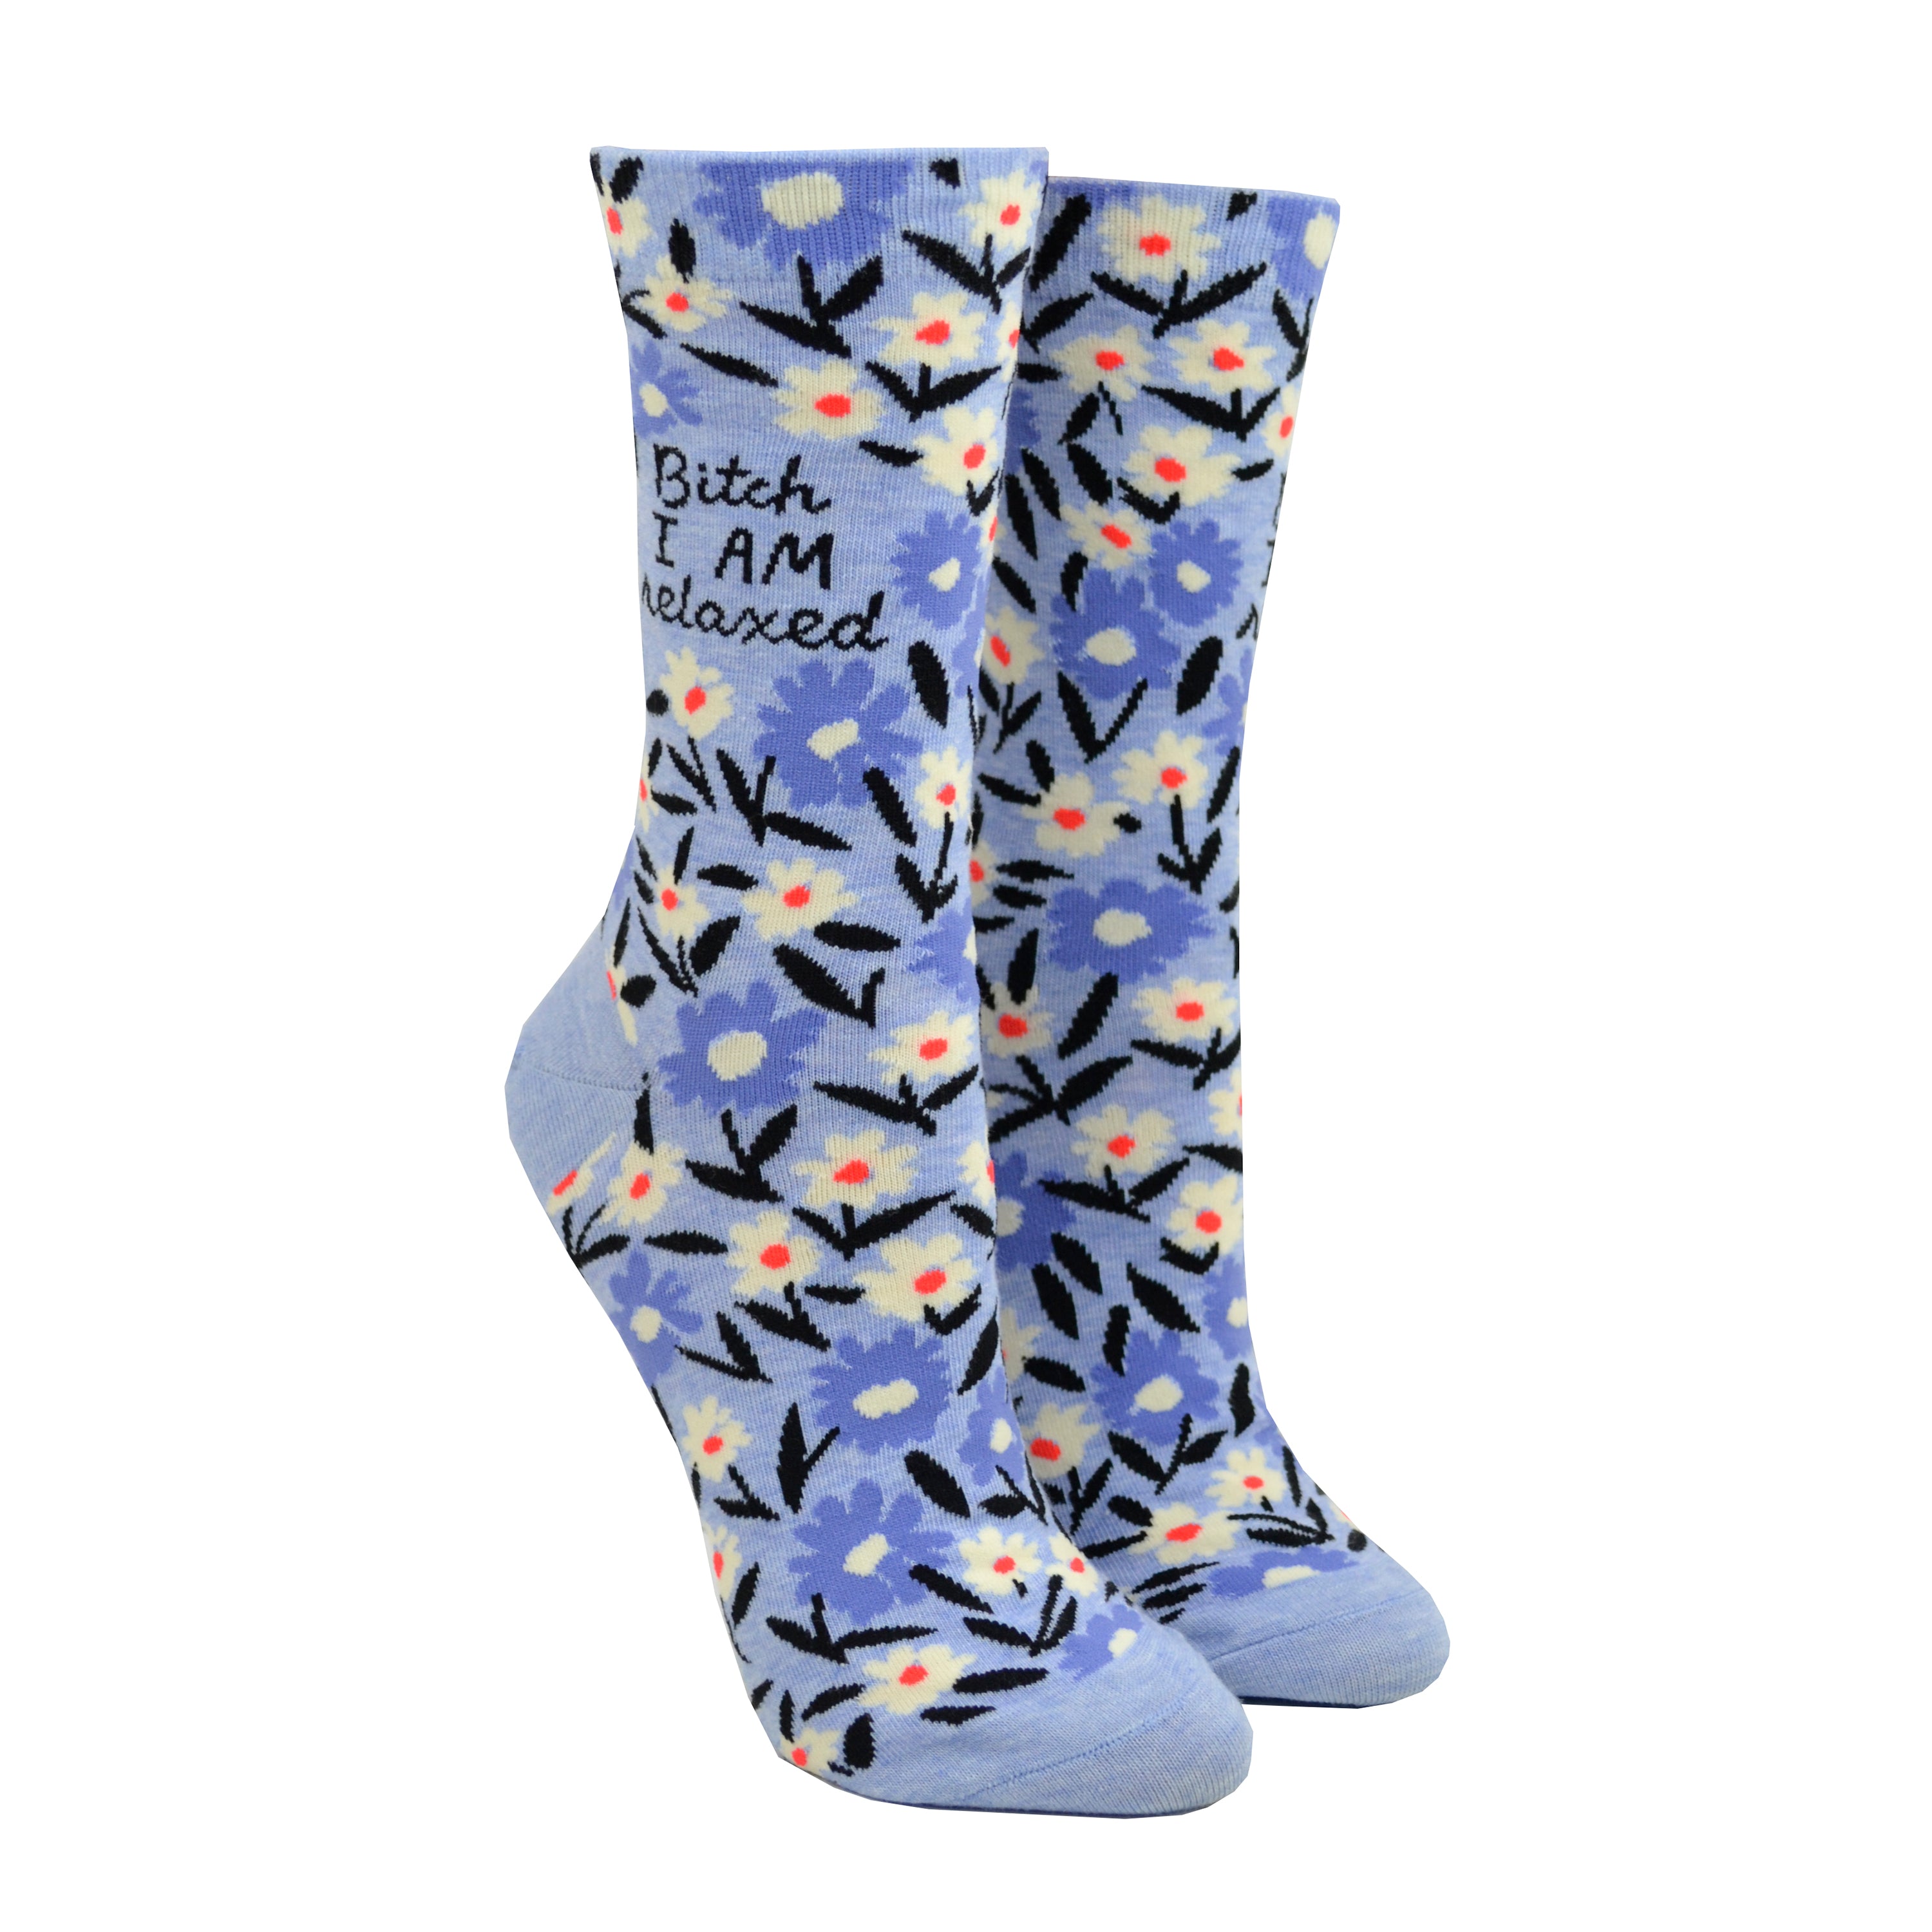 Shown on a leg form, a pair of Blue Q blue cotton women’s crew socks with blue and white floral pattern and “Bitch, I AM relaxed” text